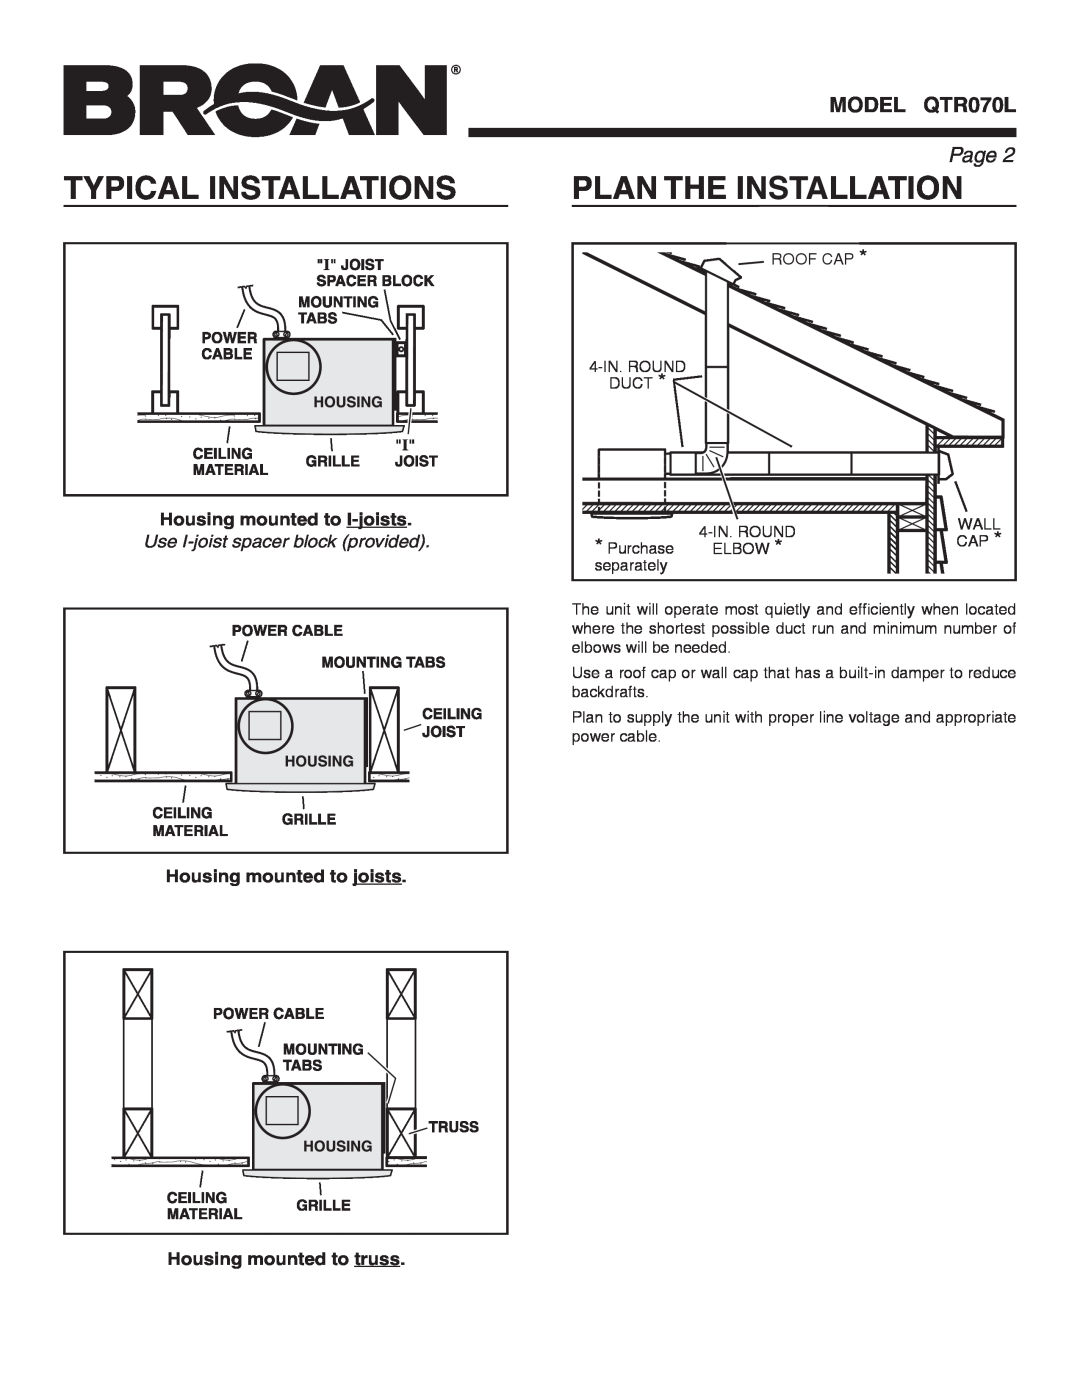 Broan QTR070L Typical Installations, Plan The Installation, Page , Housing mounted to I-joists, Housing mounted to joists 